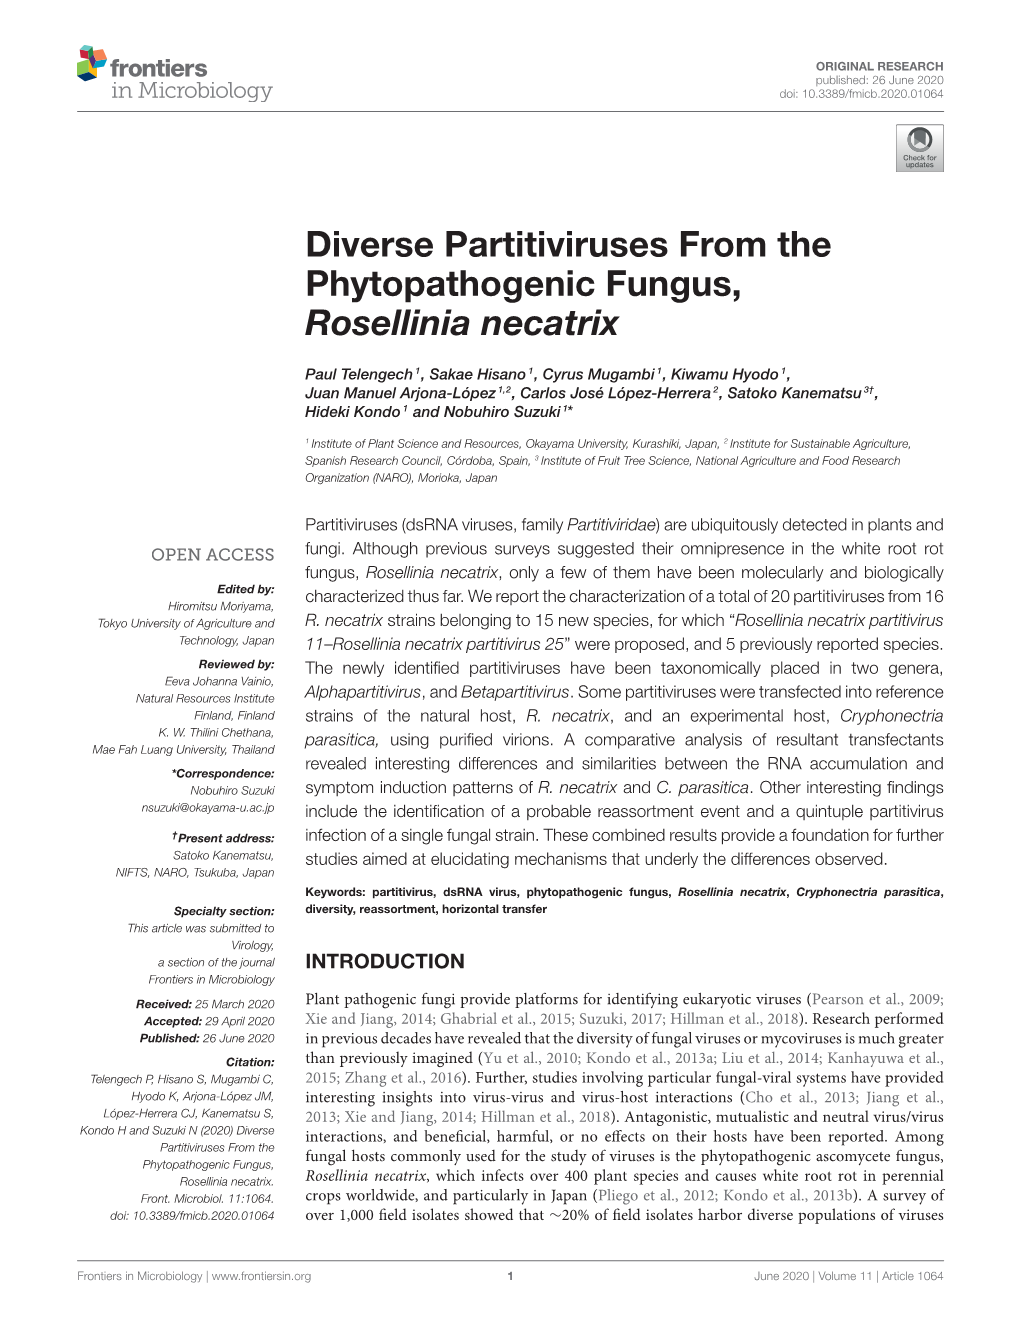 Diverse Partitiviruses from the Phytopathogenic Fungus, Rosellinia Necatrix